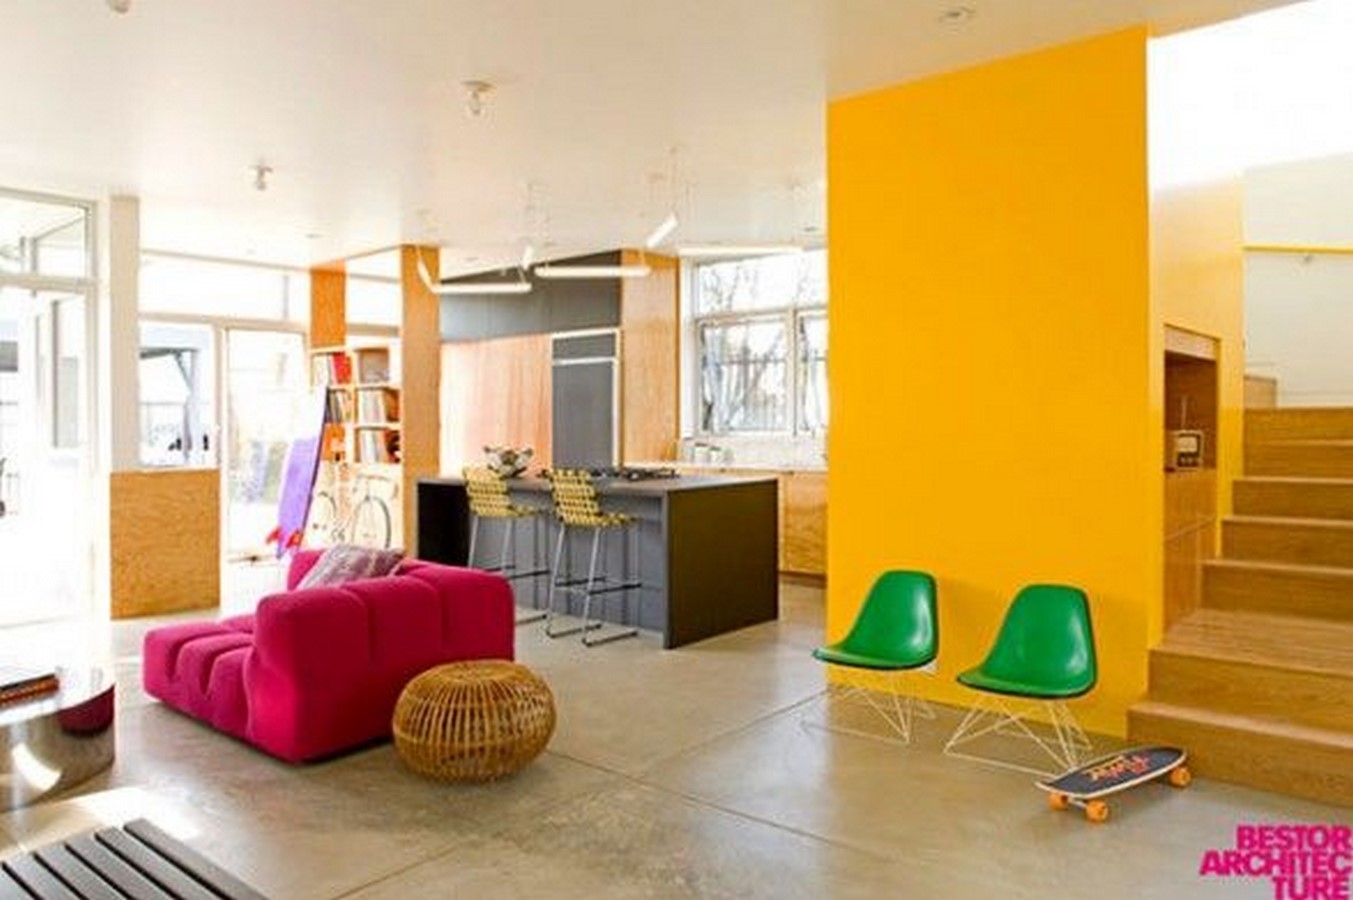 A3978 30 Examples Of Split Complementary Color Scheme In Interiors IMAGE 7 